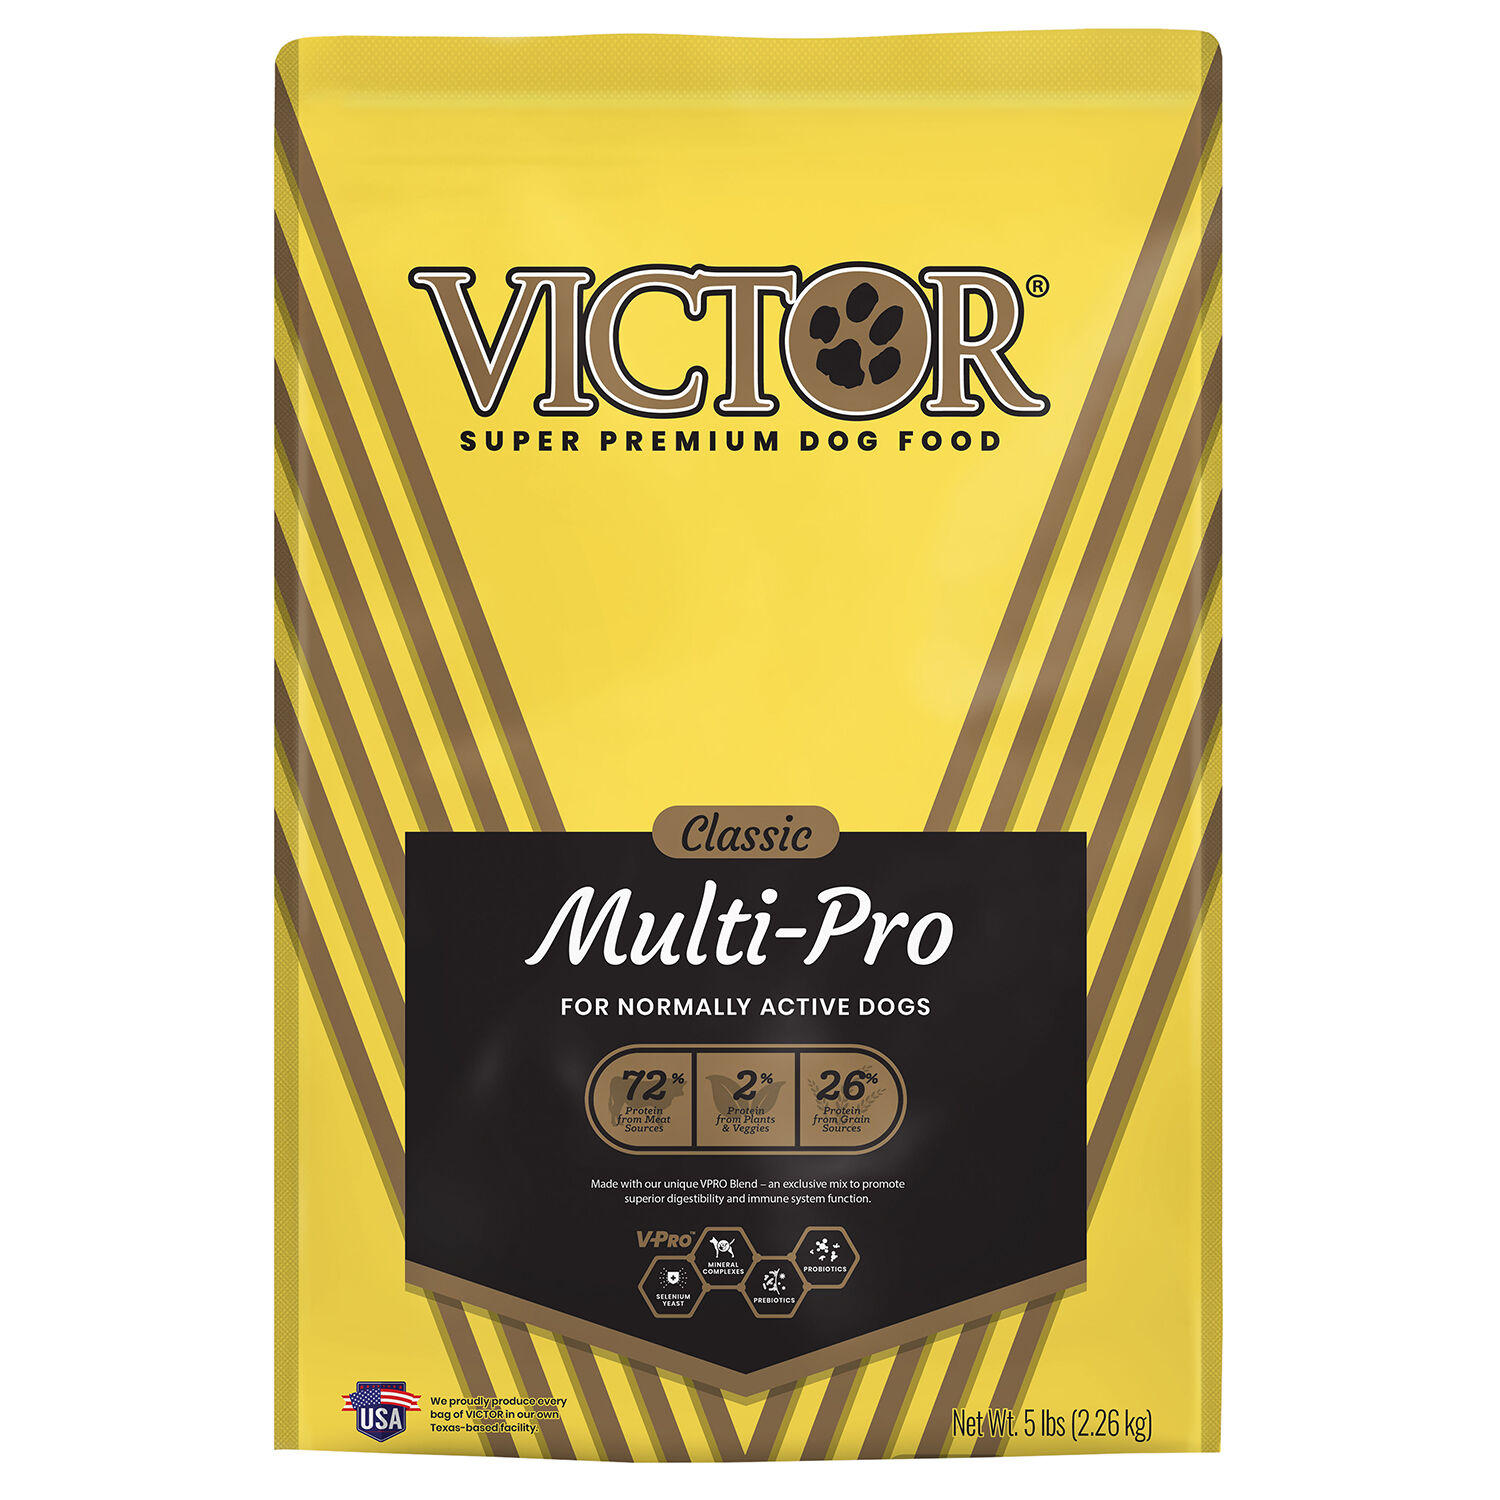 854524005344_5lb_VICTOR_Classic_MultiPro_Front (1).jpg